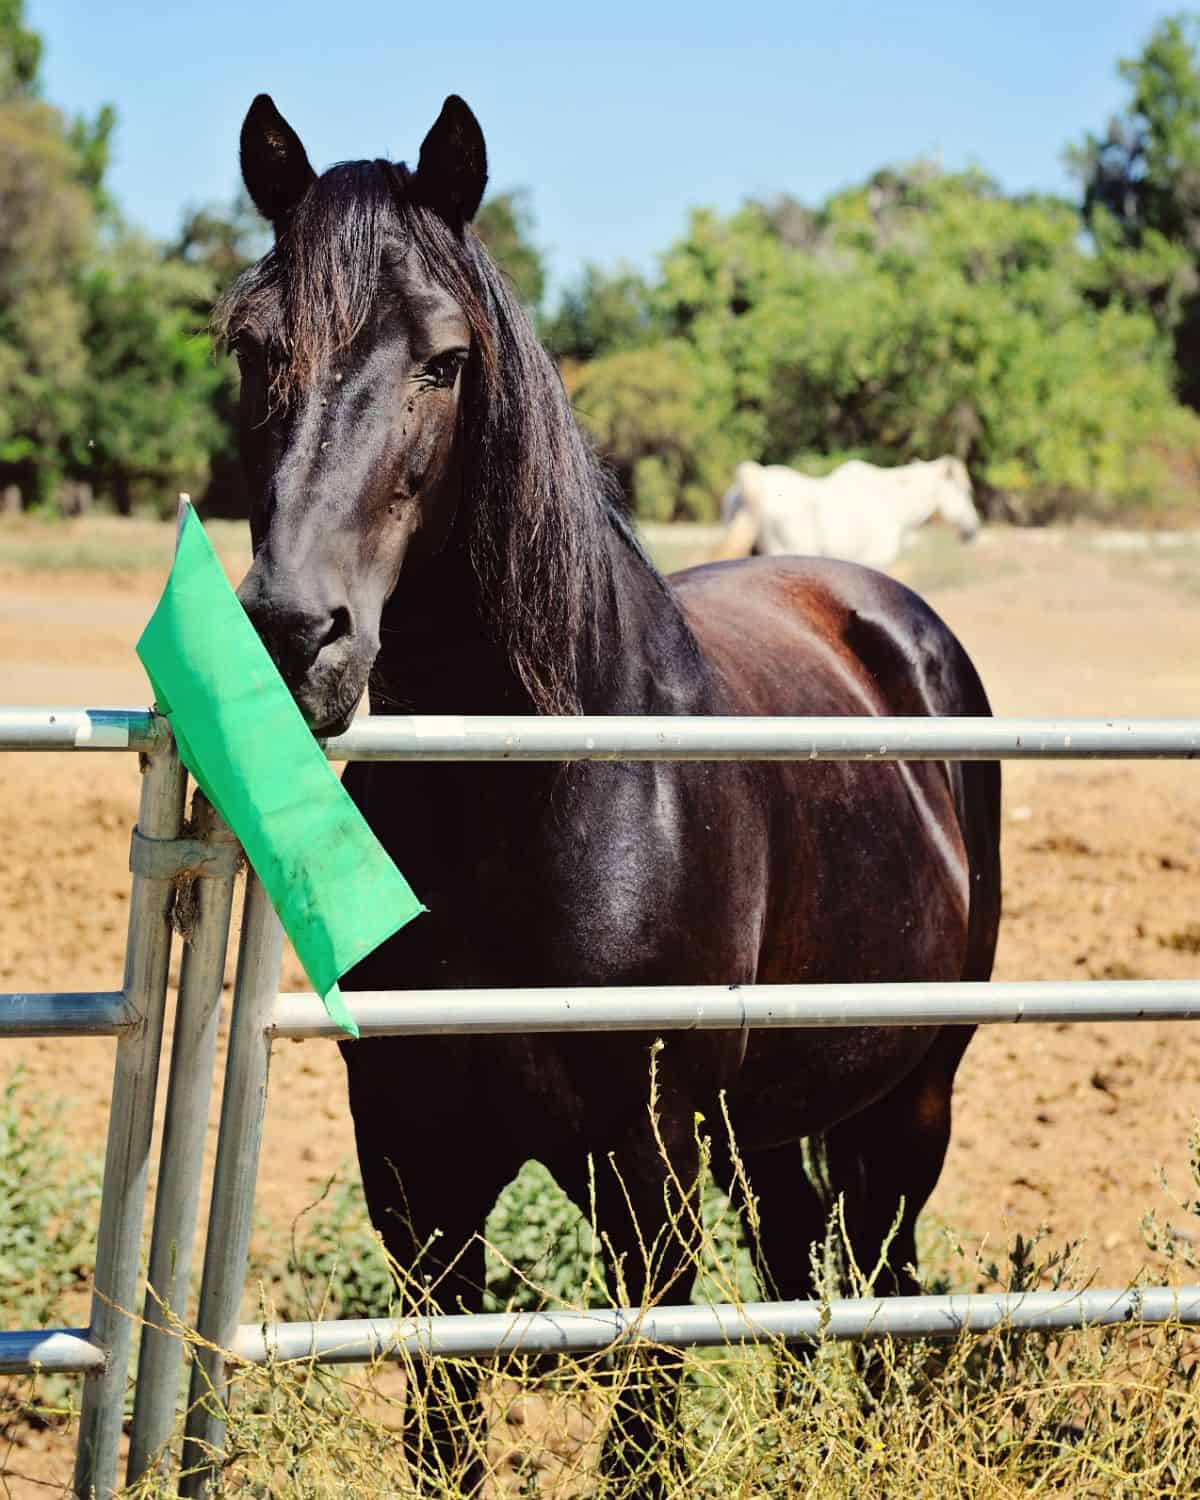 A black horse on a paddock looking at a green plastic flag.